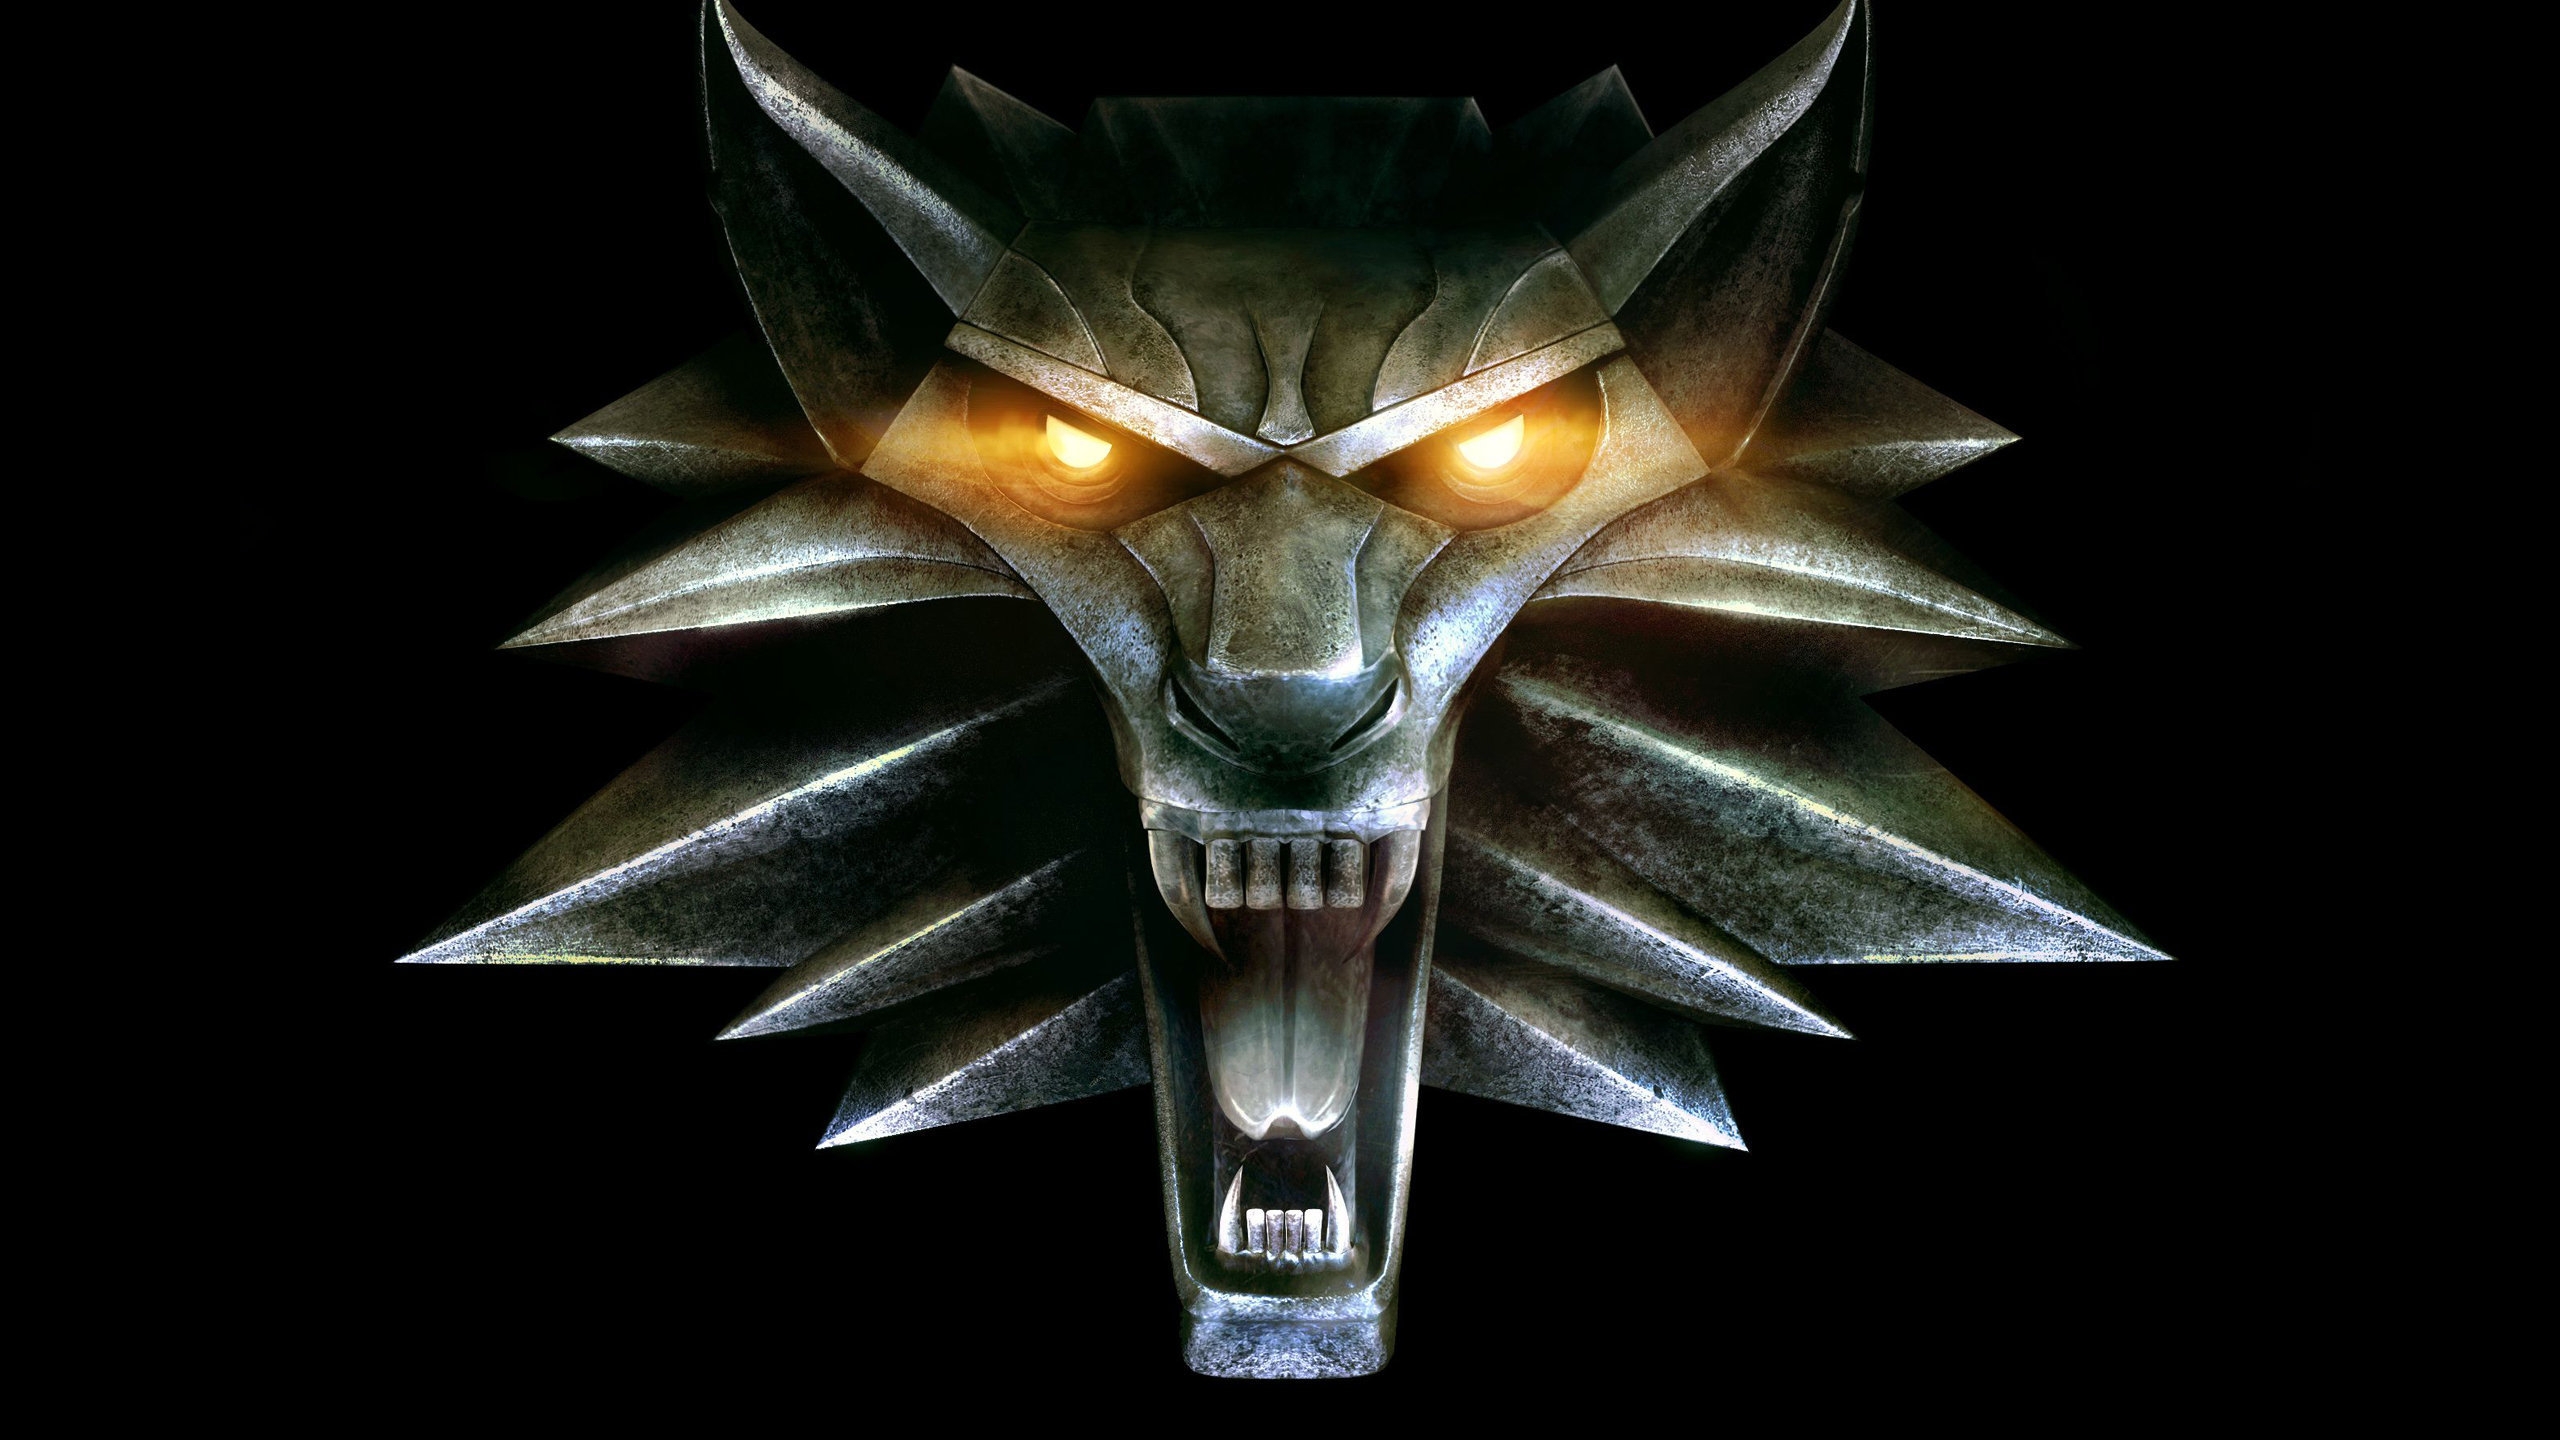 Iron head Wolf for 2560x1440 HDTV resolution